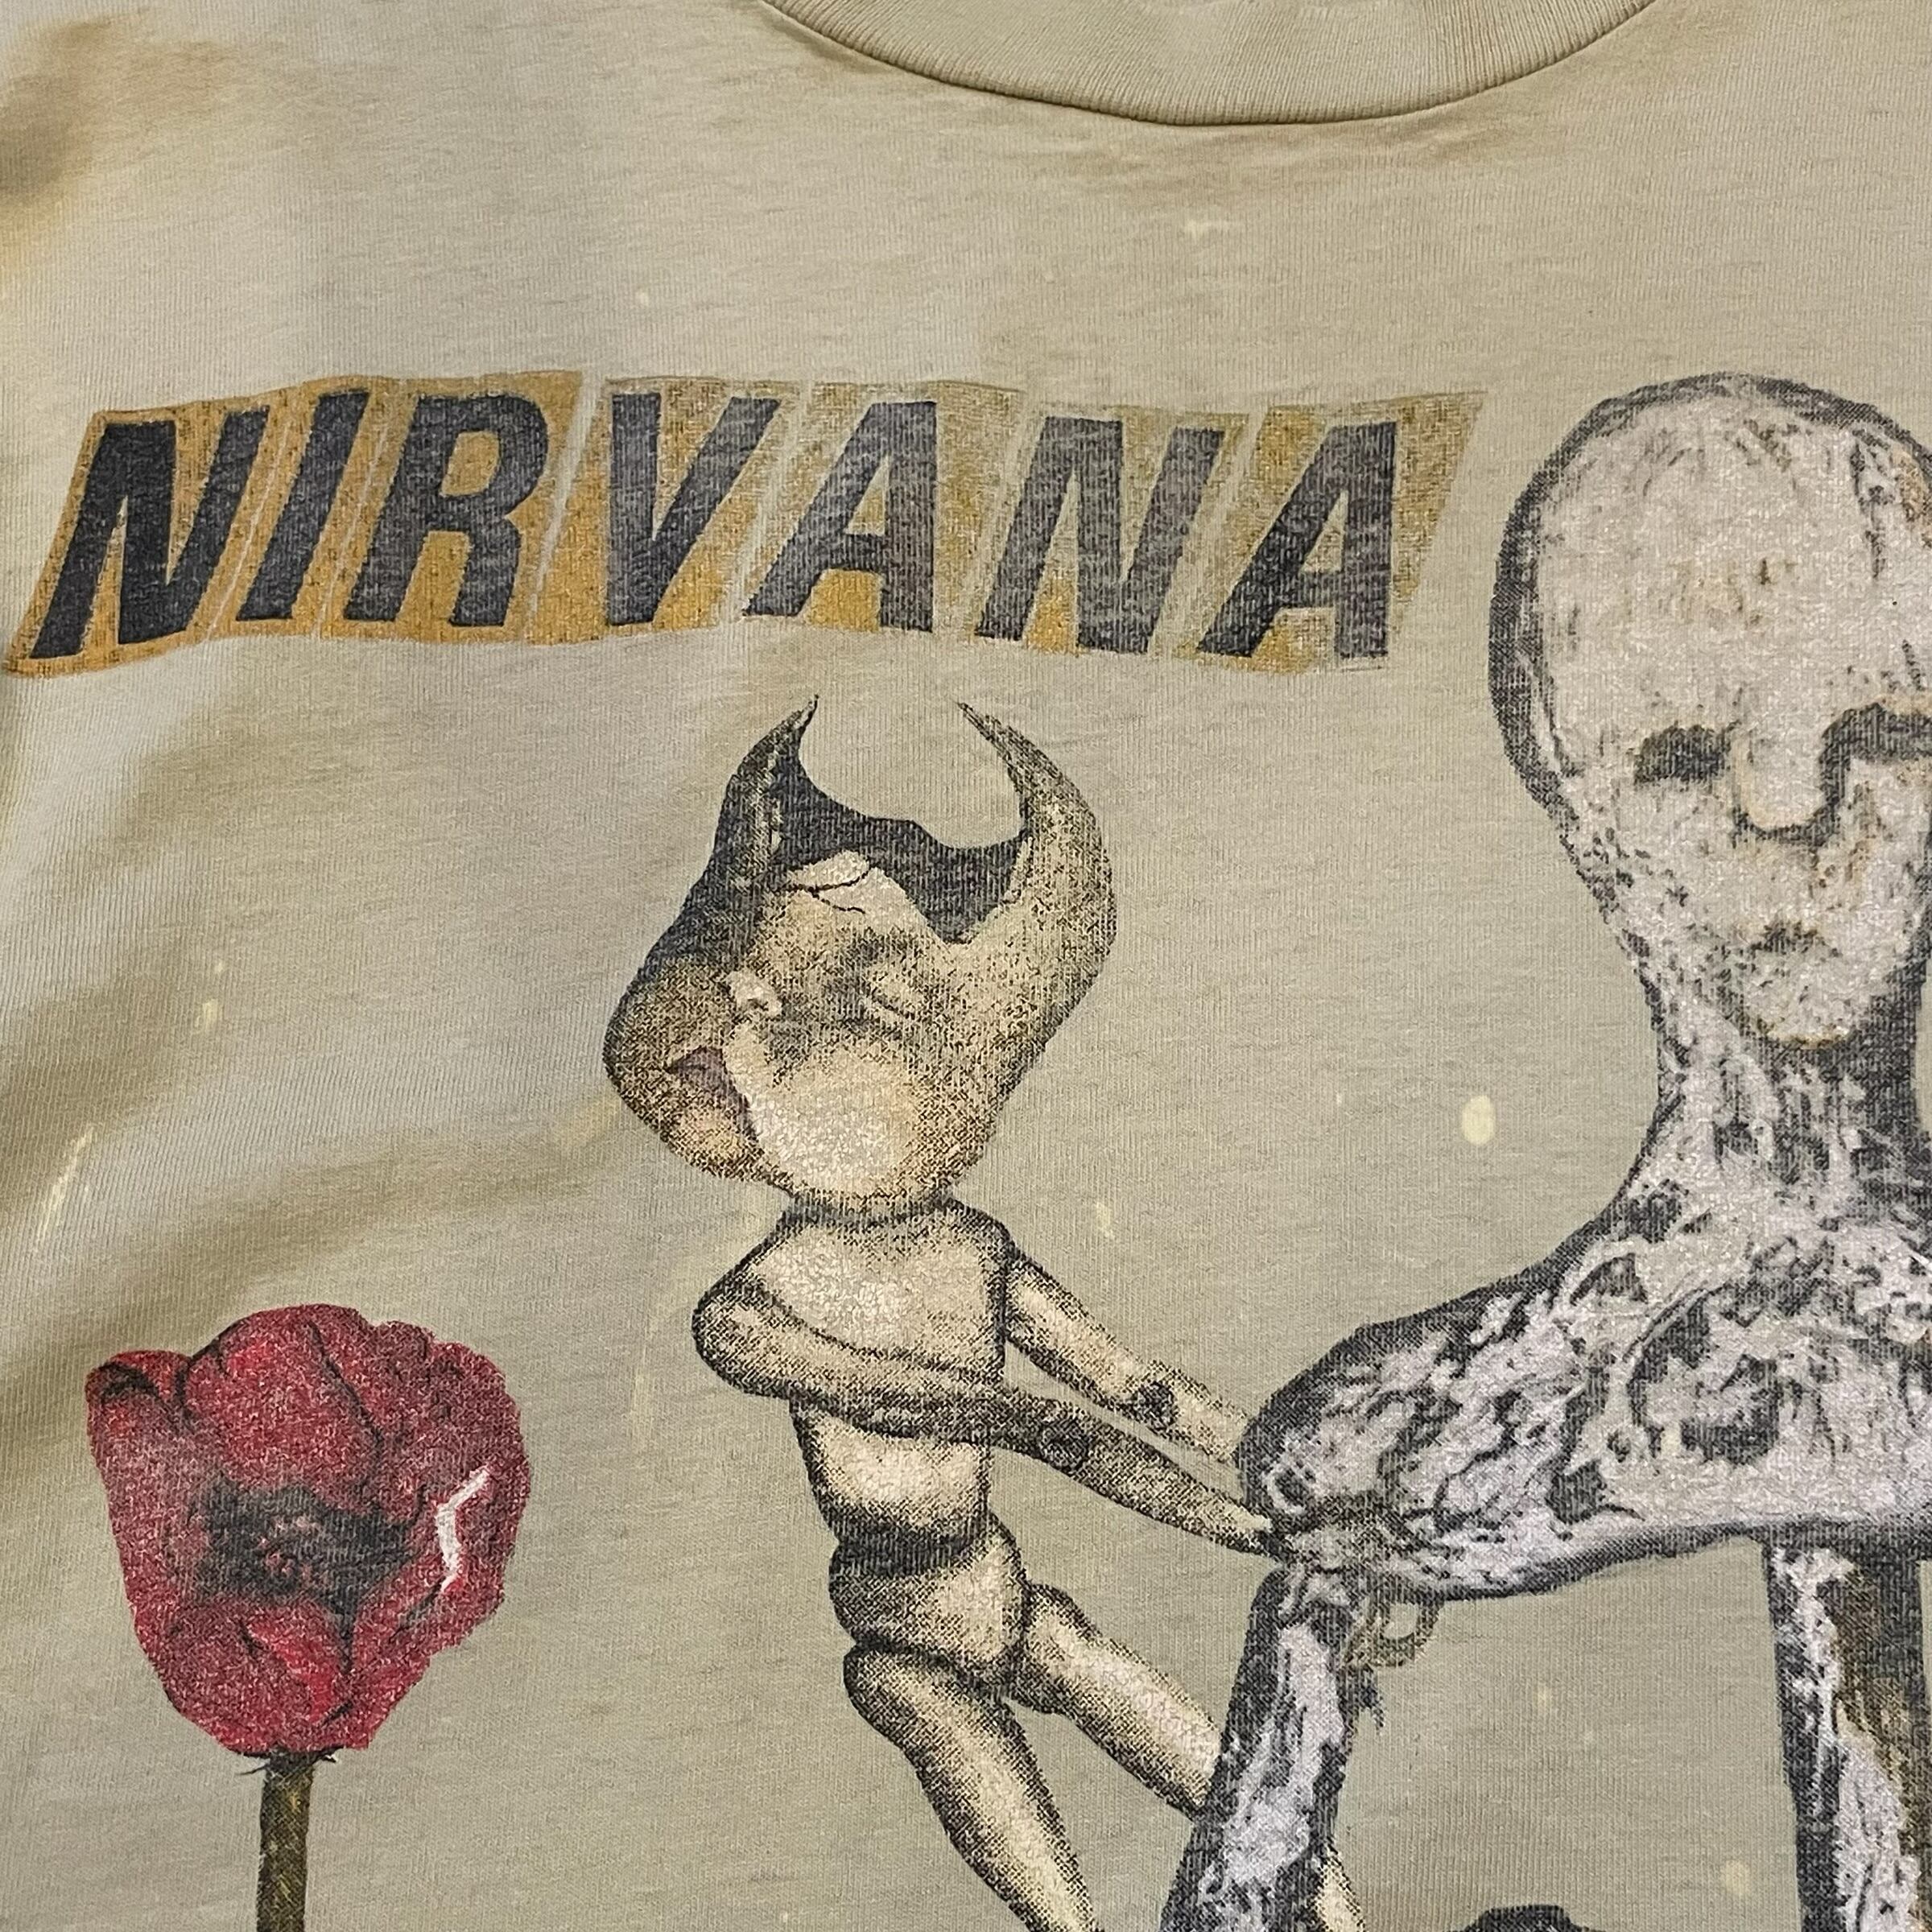 90s NIRVANA “INCESTICIDE” t-shirt | What'z up